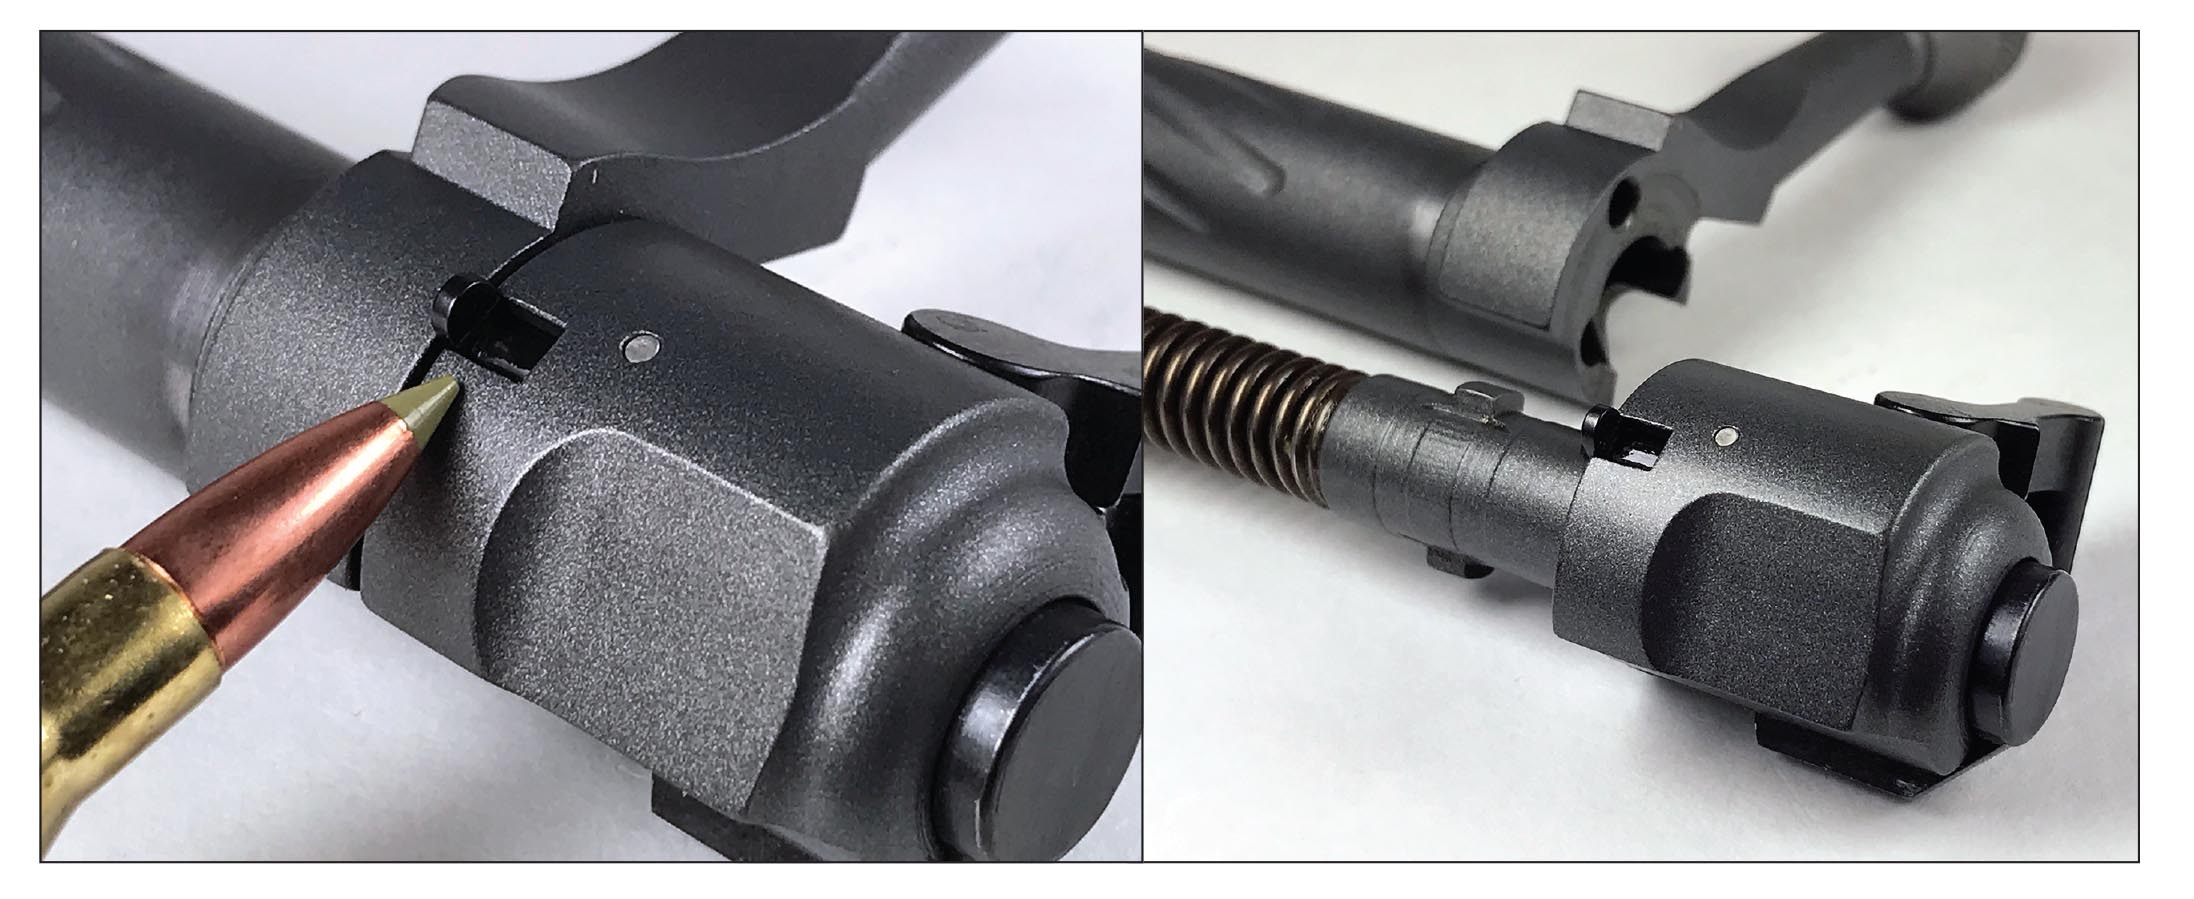 Pulling back on a small protruding pin (left) releases the firing pin assembly and allows for easy removal.